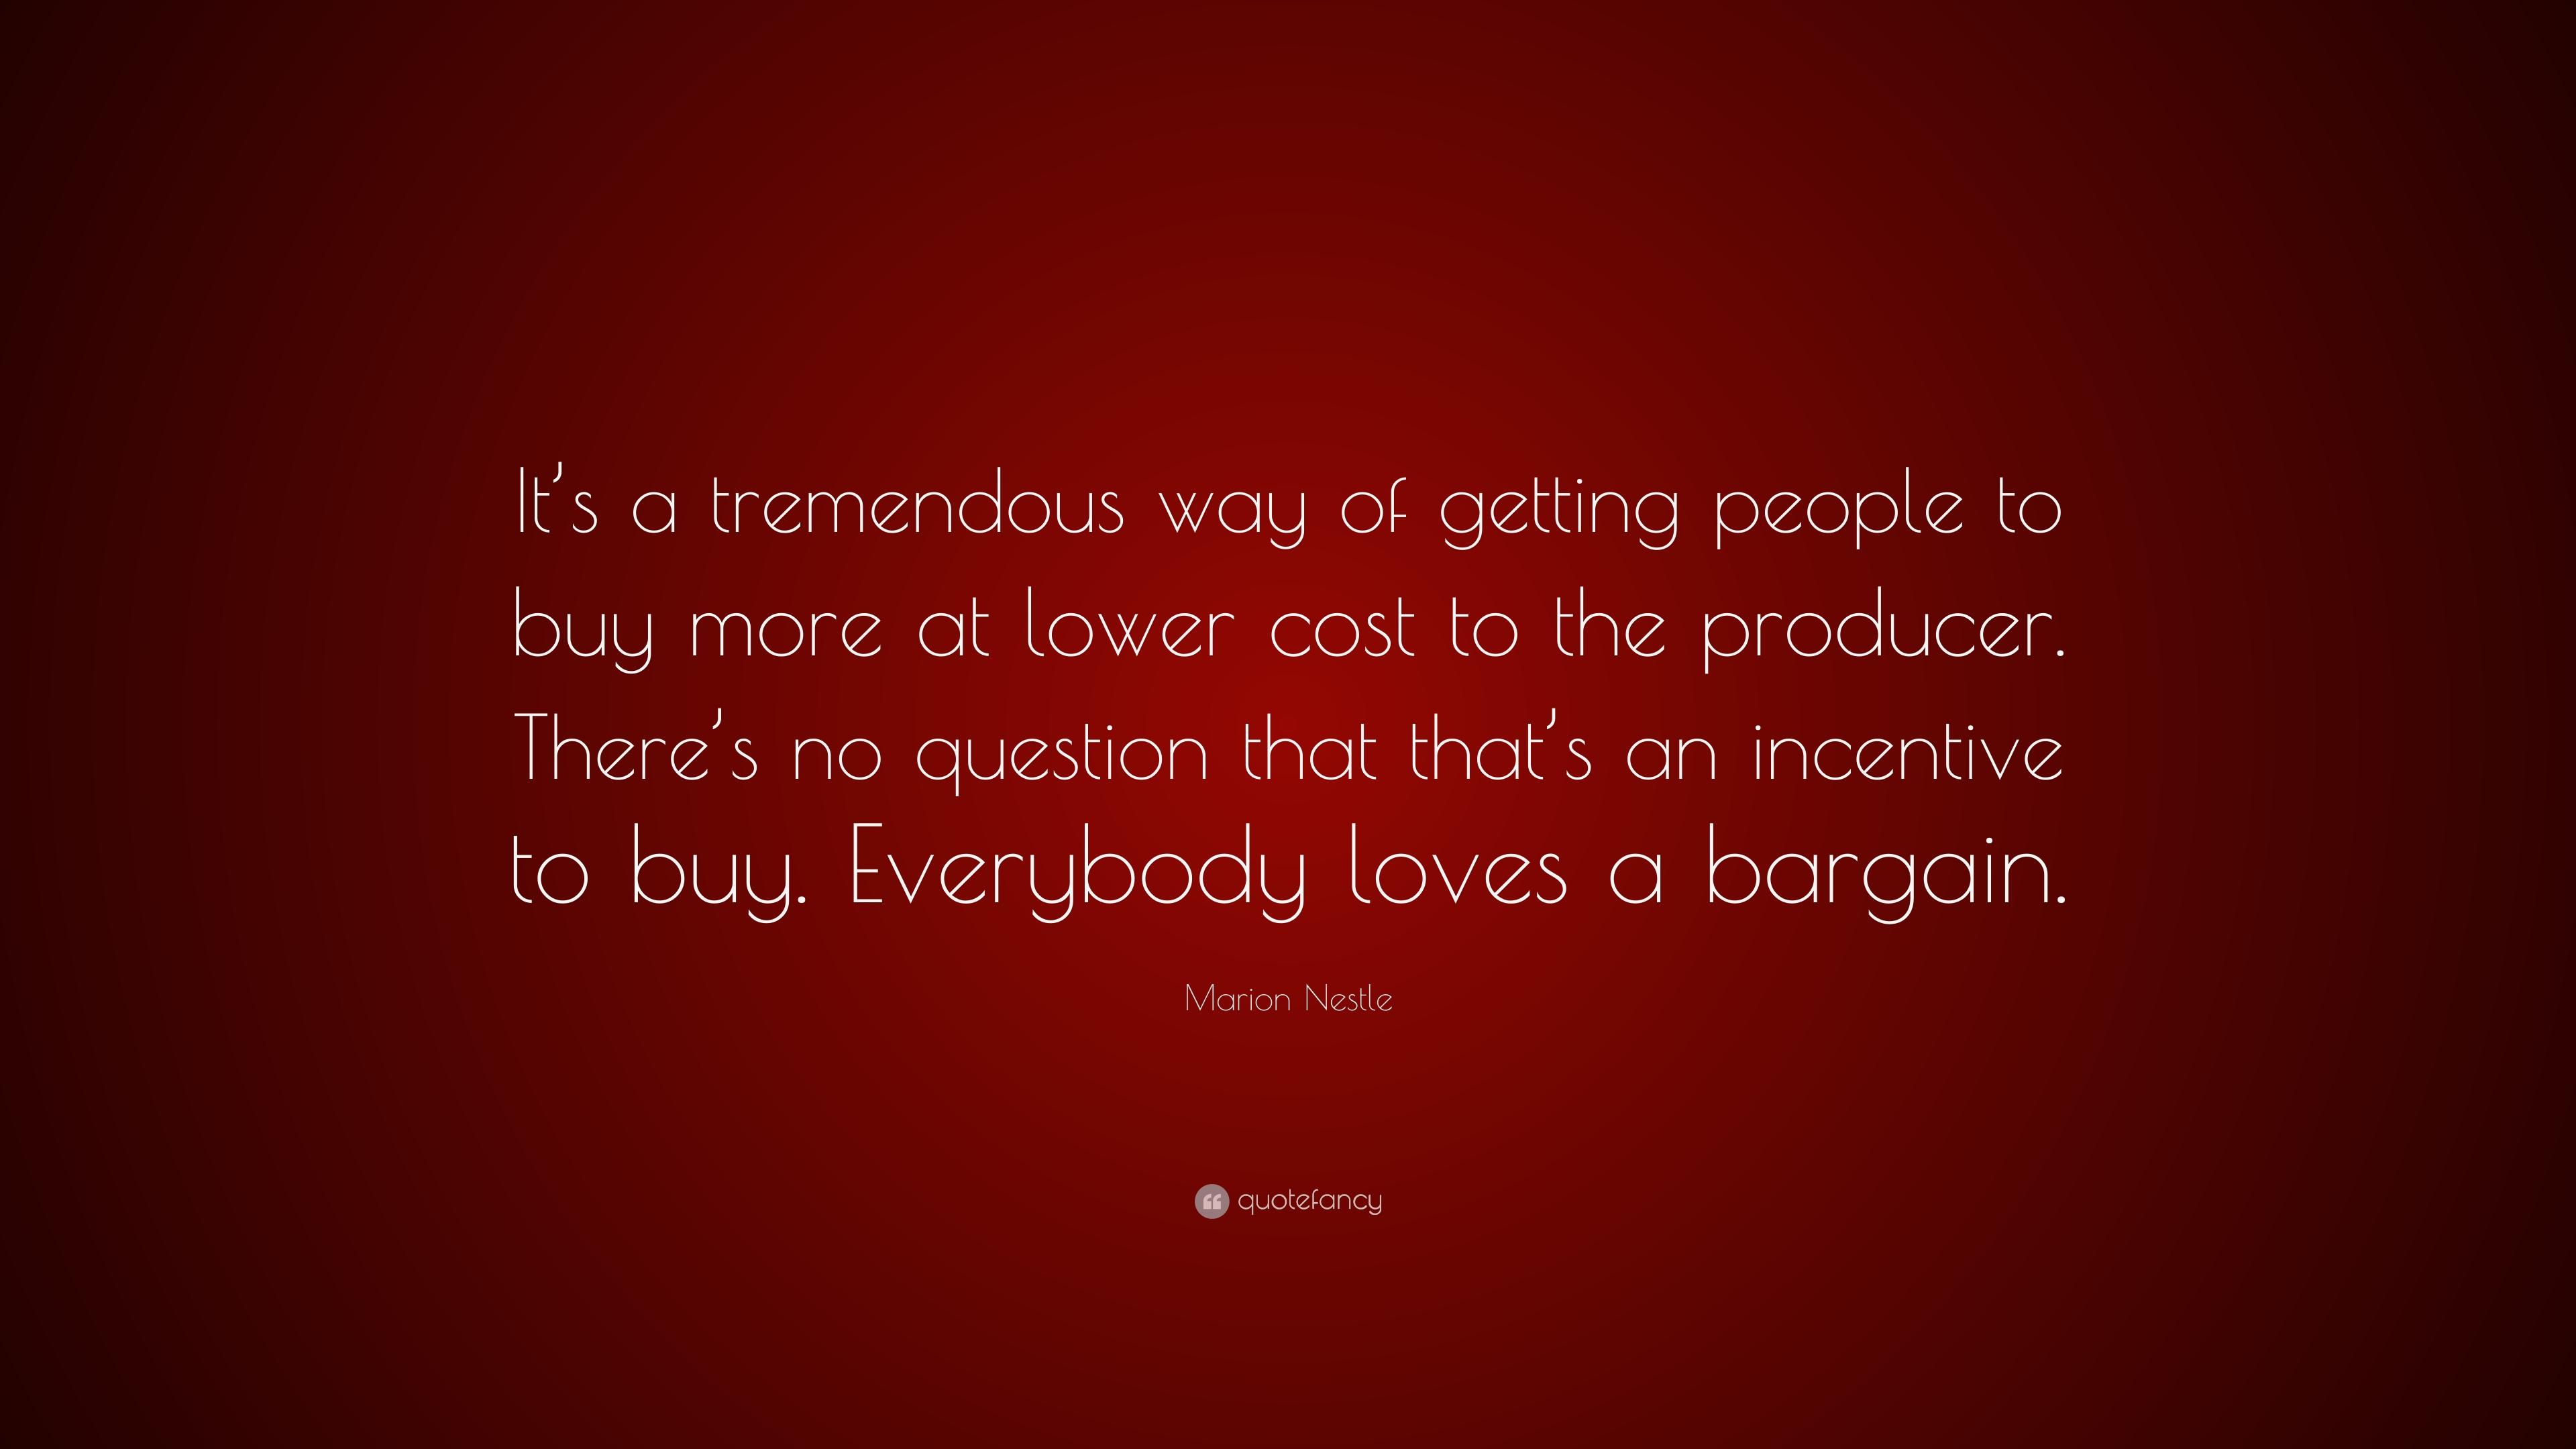 Marion Nestle Quote: “It's a tremendous way of getting people to buy